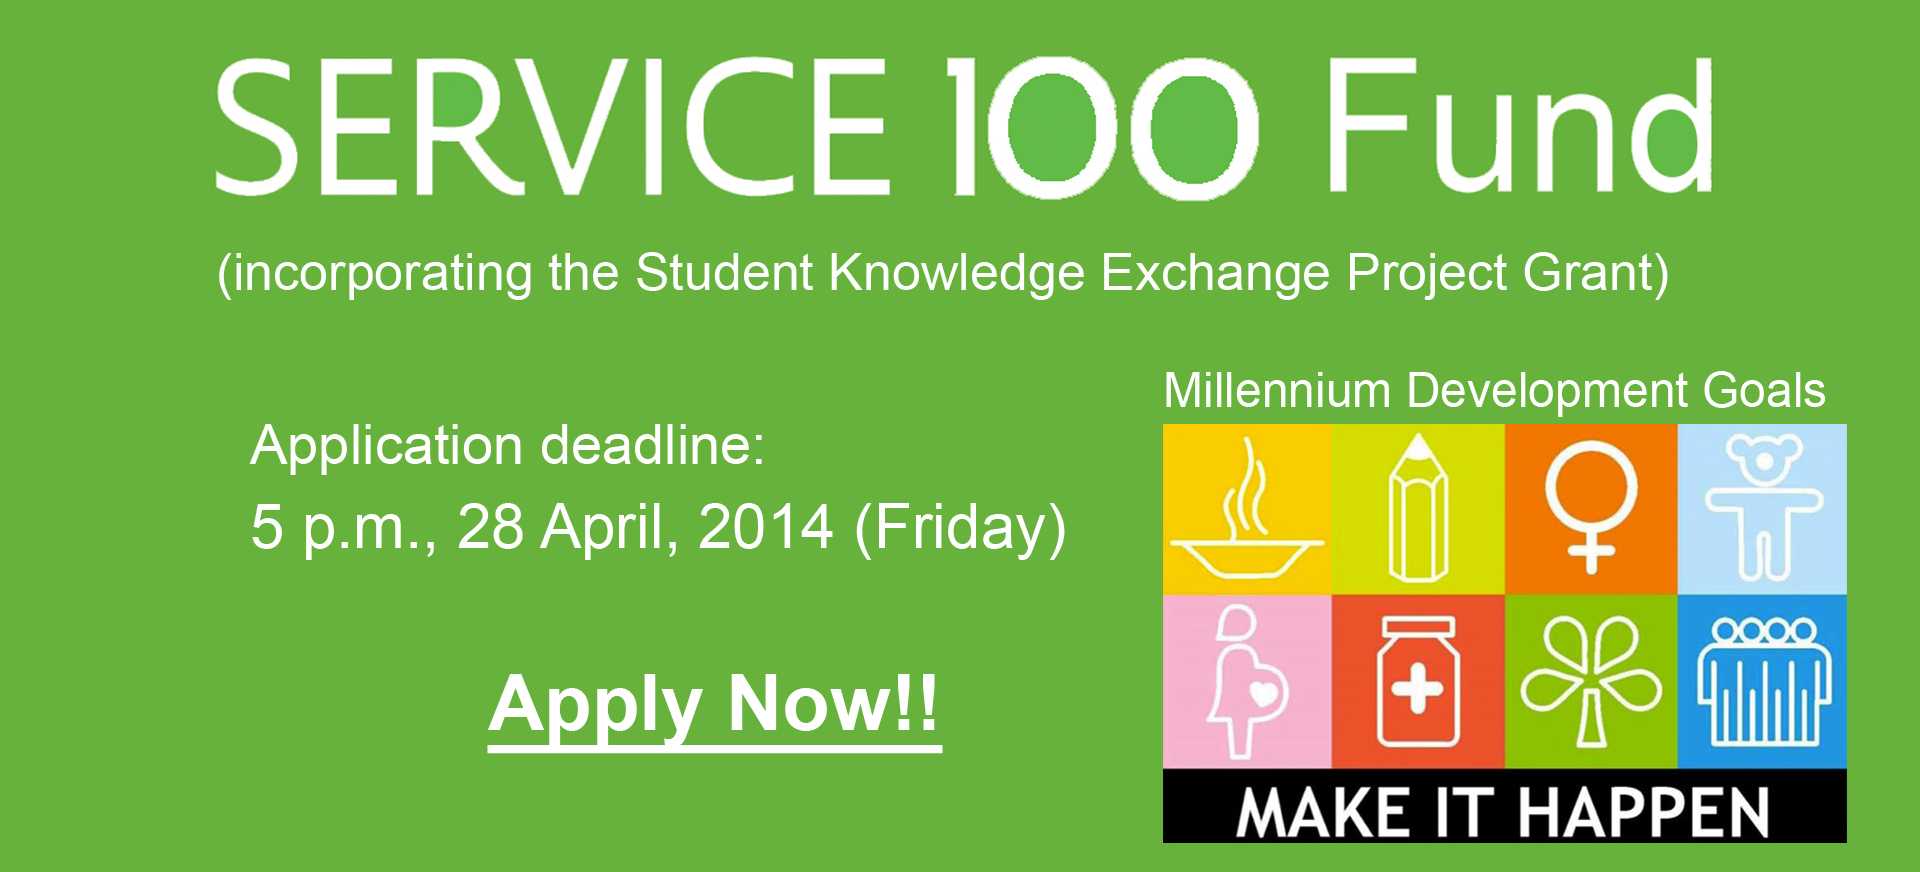 SERVICE 100 Fund is now open for application